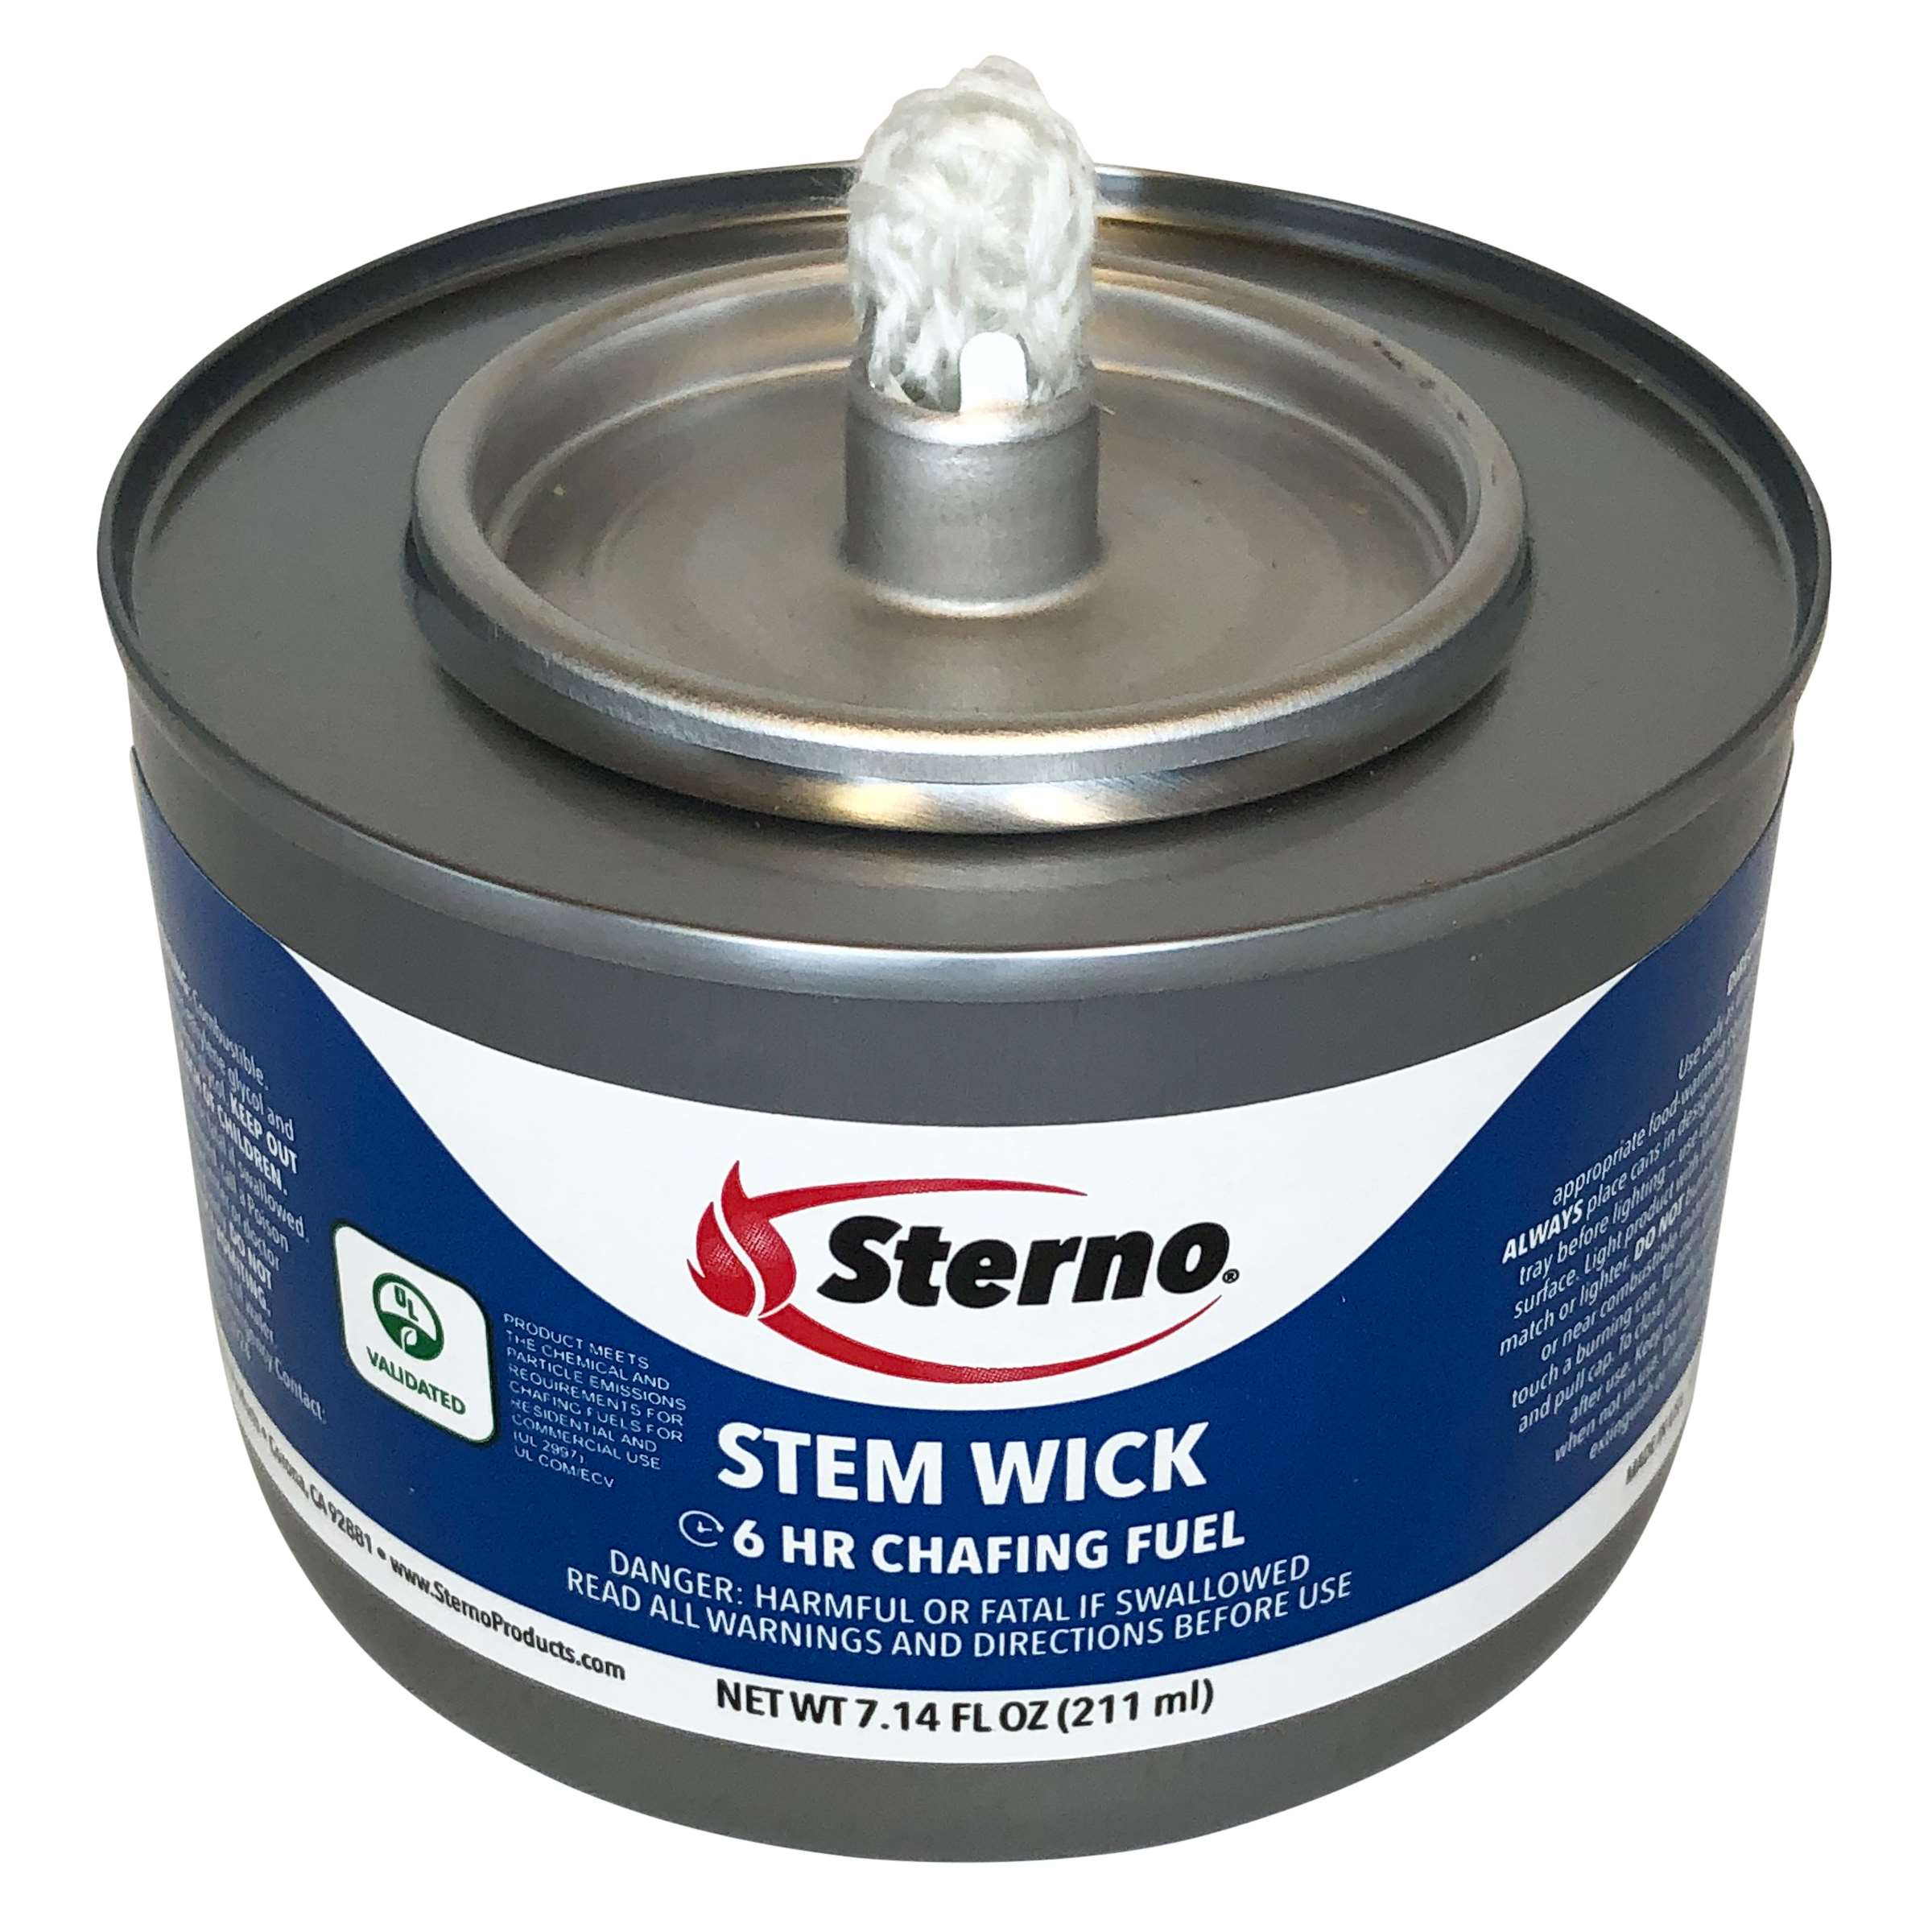 Sterno Stem Wick 6 hour 24/7.14oz - Sold by PACK